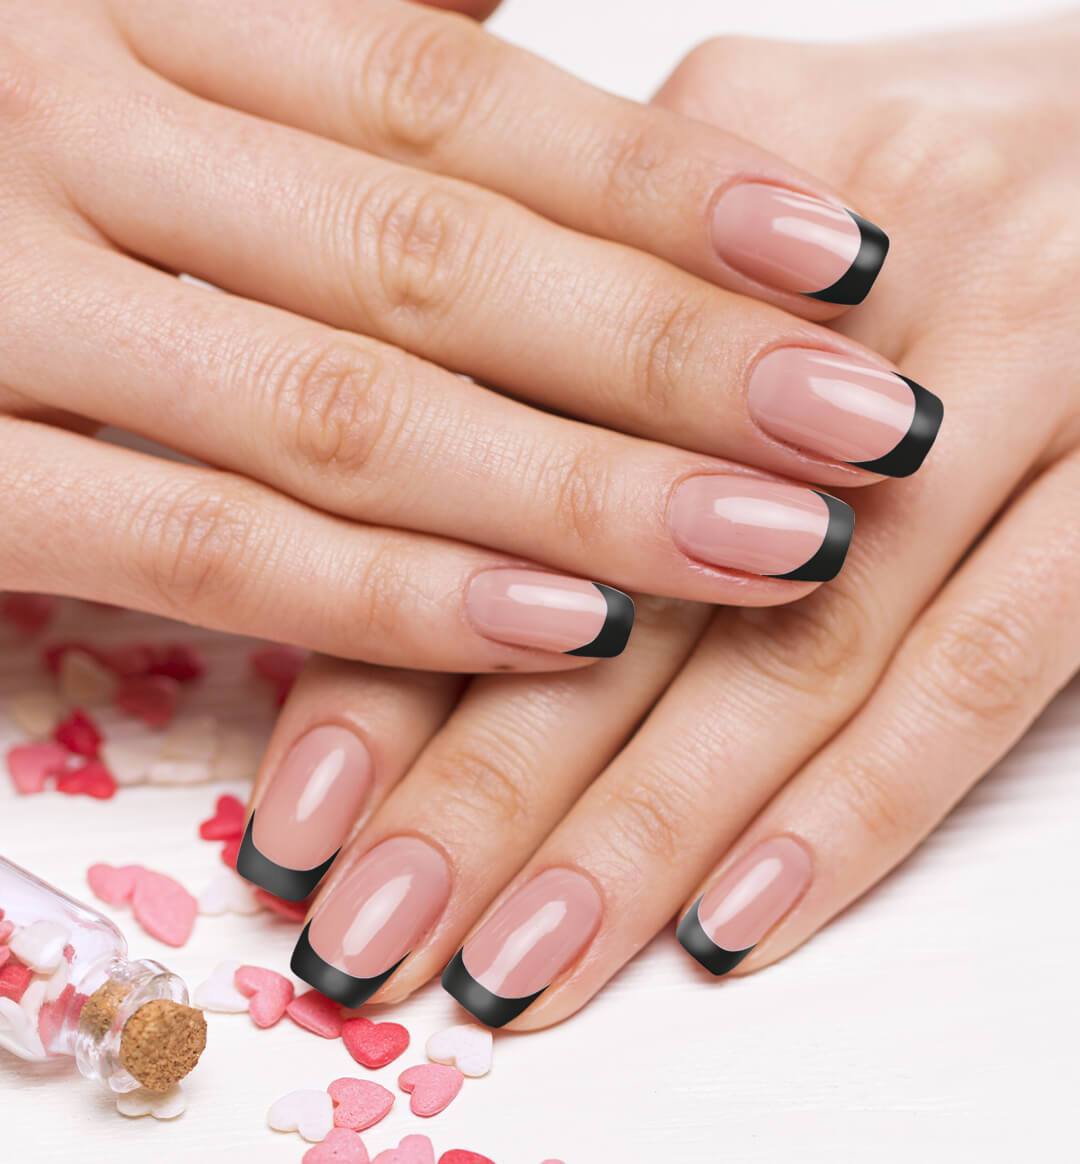 Why won't nail polish remover take off my French manicure? How can I remove  it? - Quora